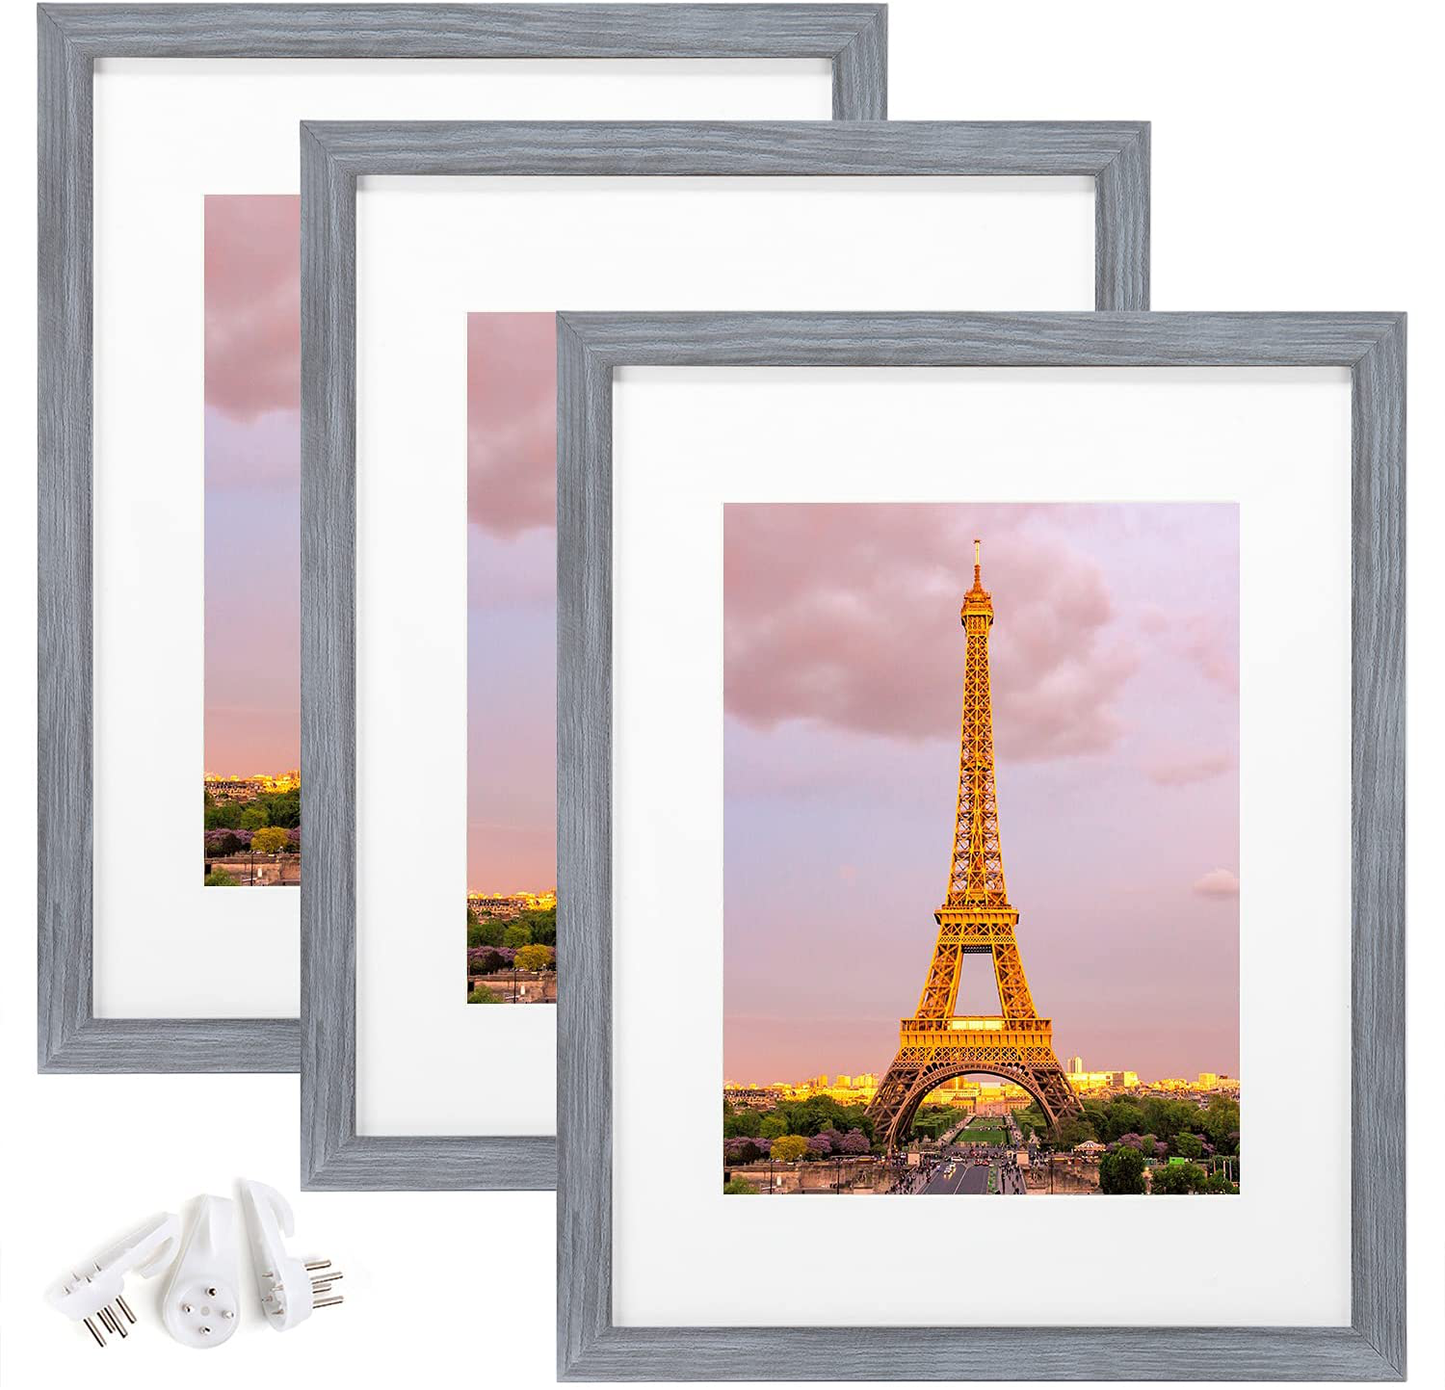 upsimples 8.5x11 Picture Frame Set of 3,Made of High Definition Glass for 6x8 with Mat or 8.5x11 Without Mat,Wall Mounting Photo Frame Ash Gray